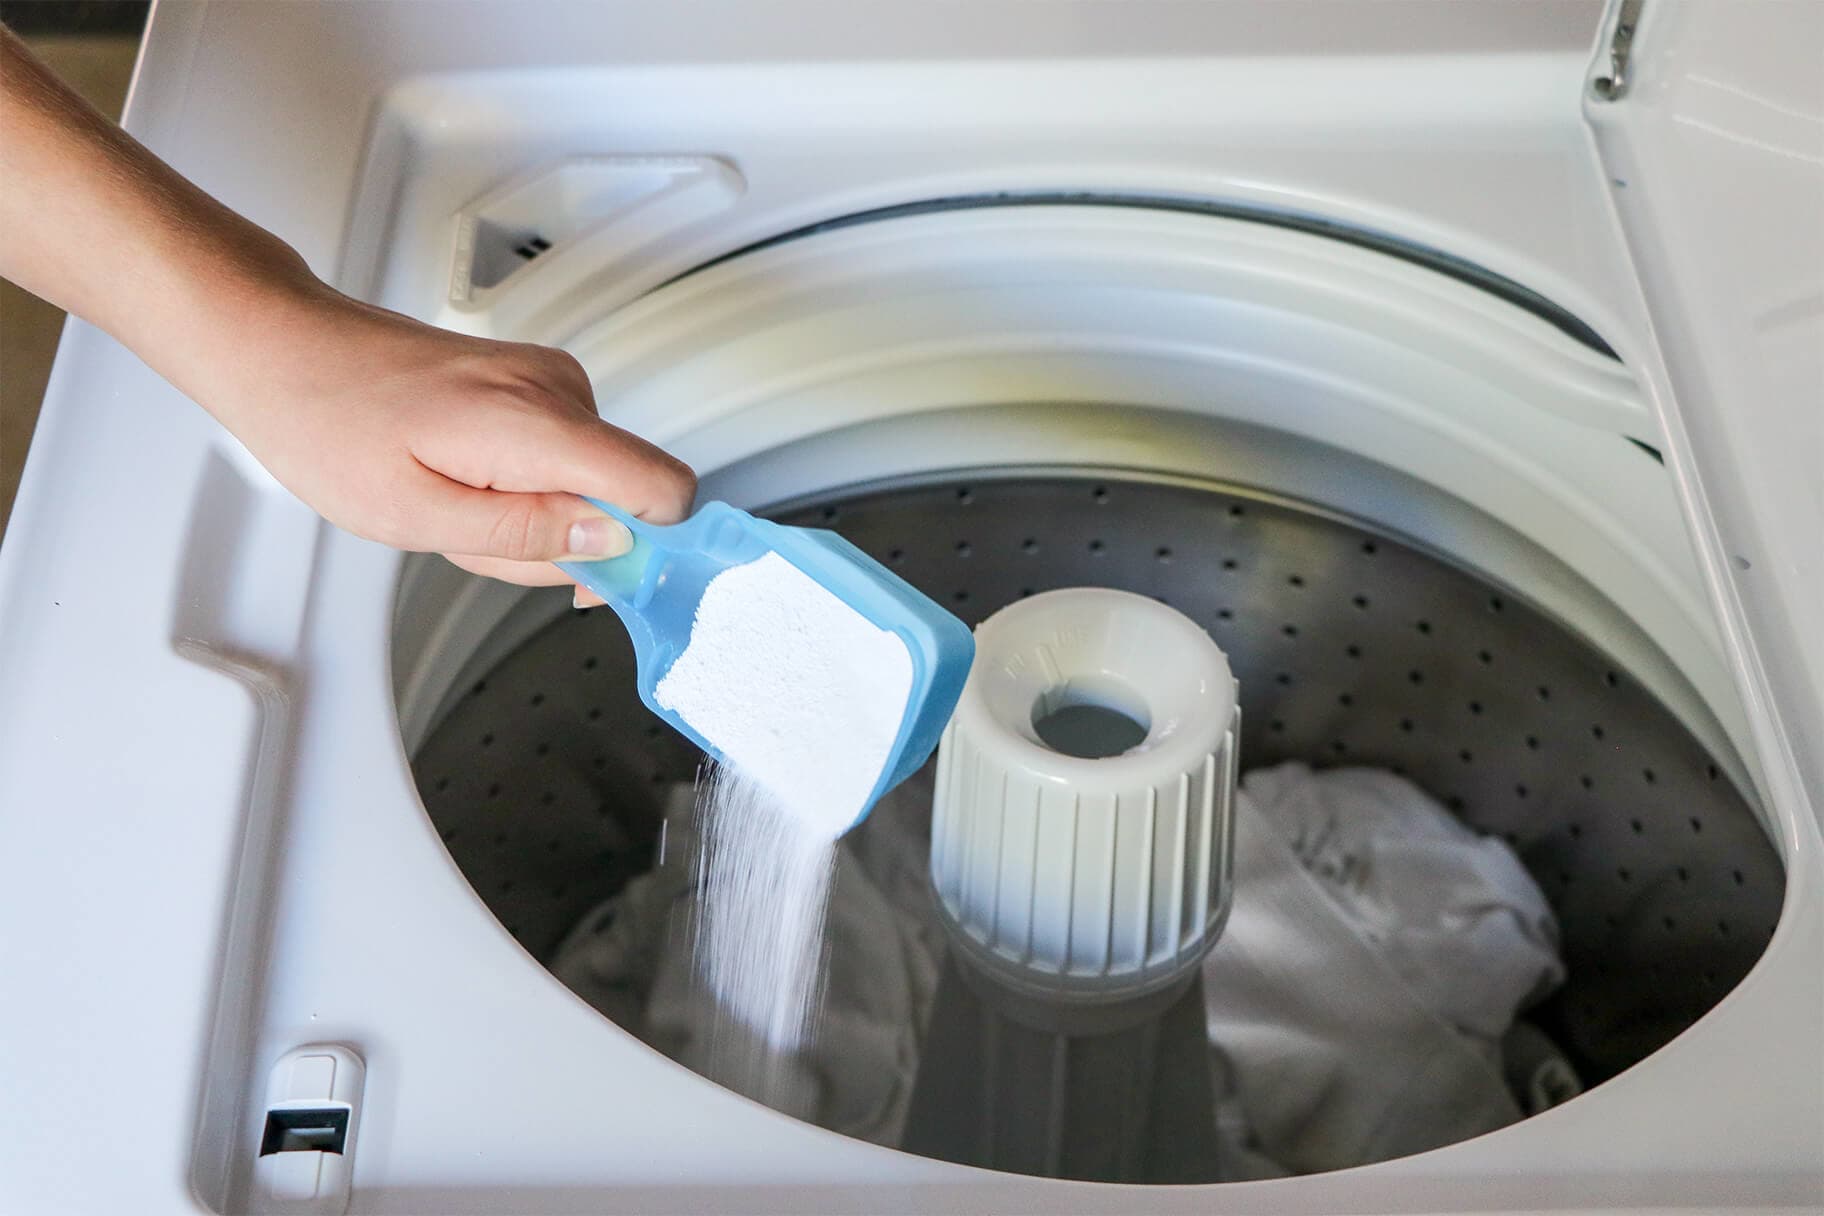 How to Wash White Clothes - Best Way to Bleach Clothing